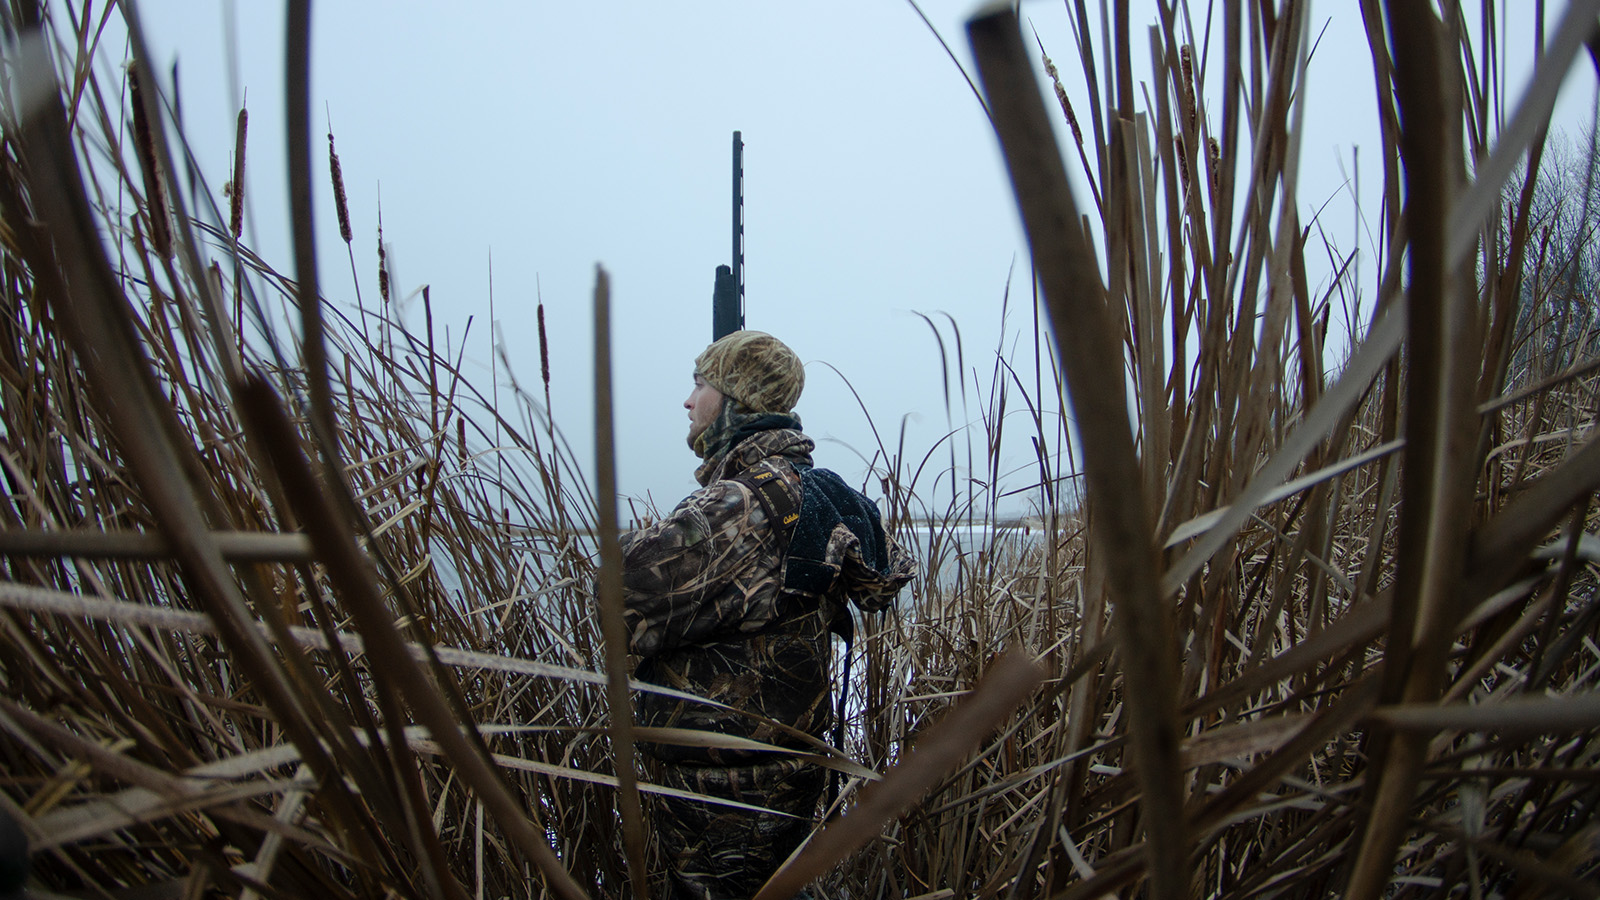 Waterfowl hunter in the cattails